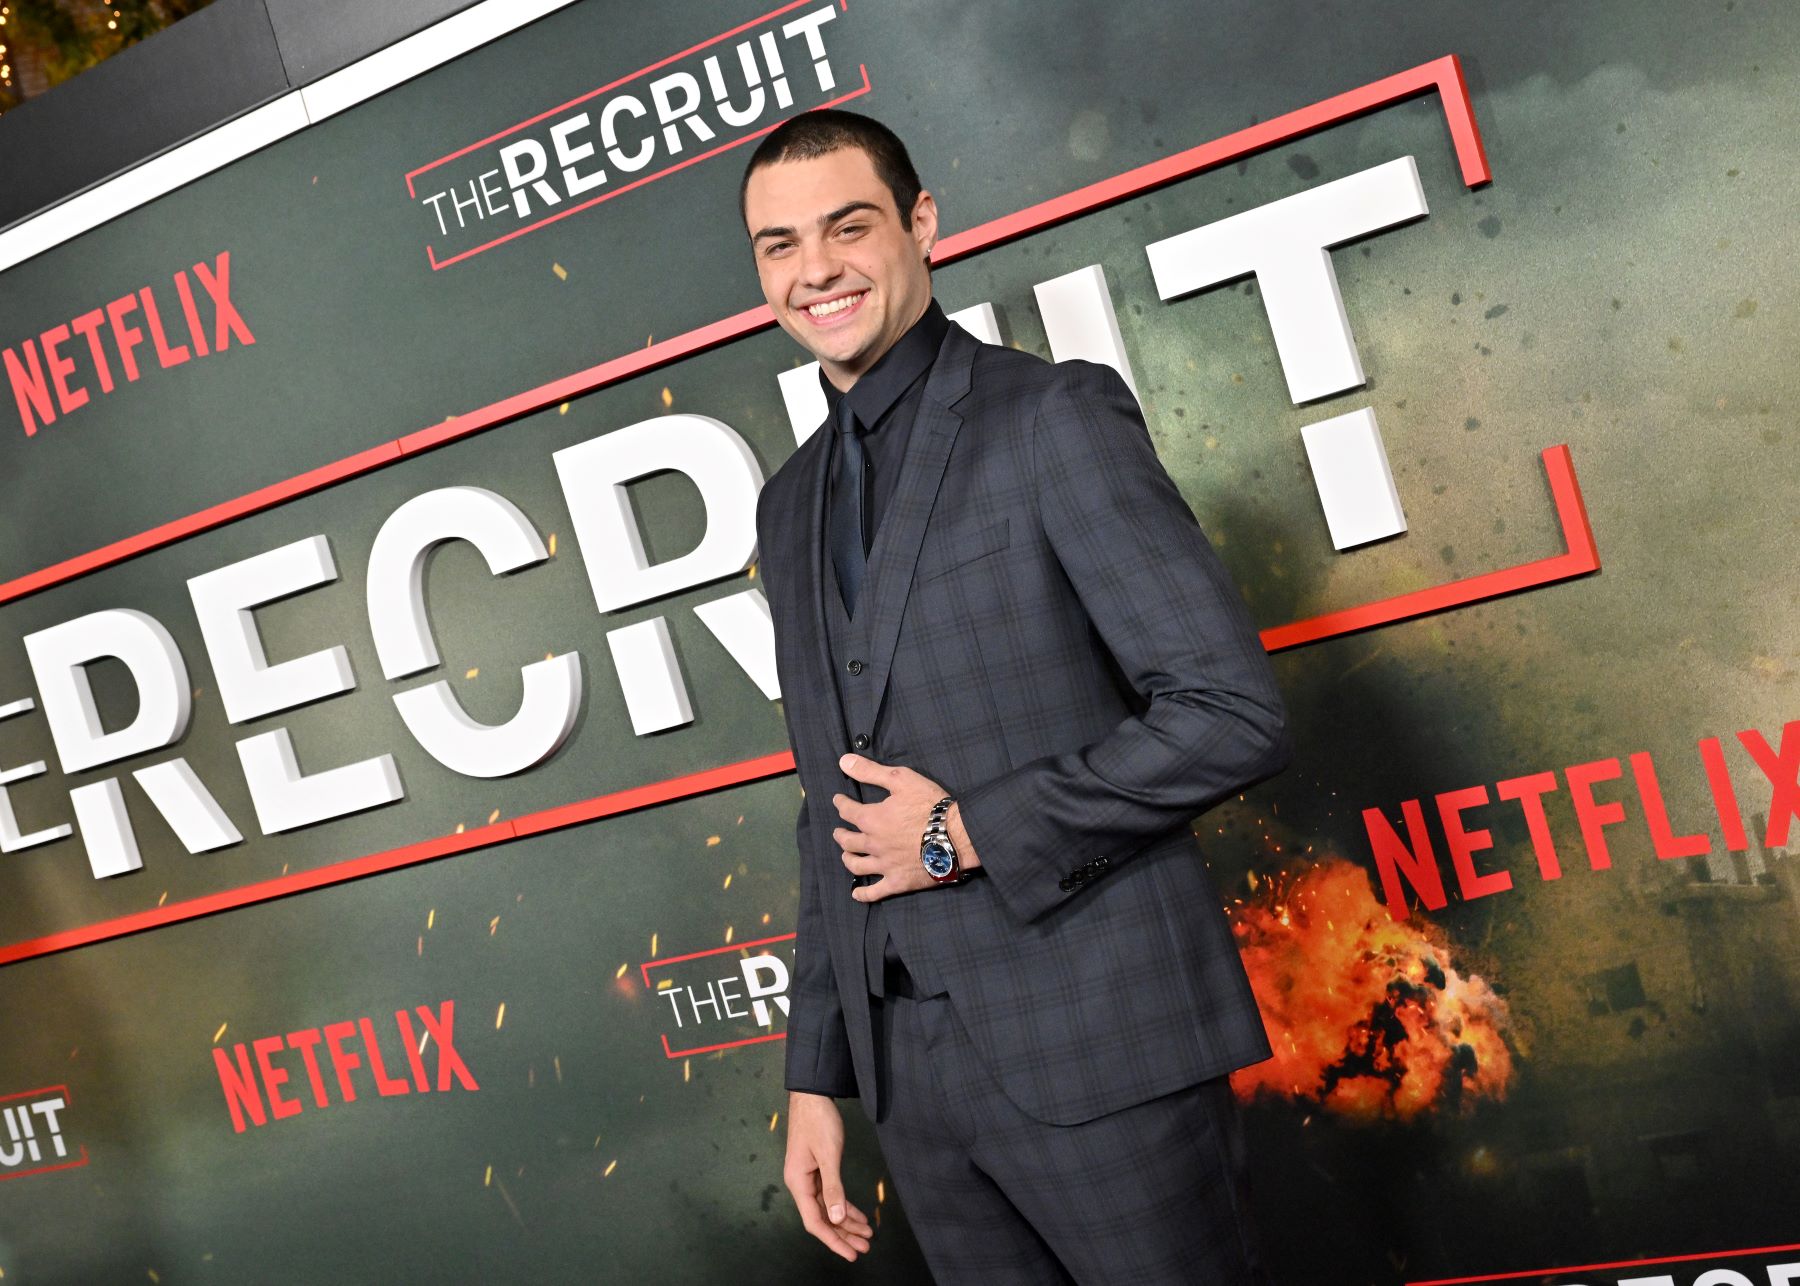 Noah Centineo at Netflix's 'The Recruit' world premiere at AMC The Grove 14 in Los Angeles, California